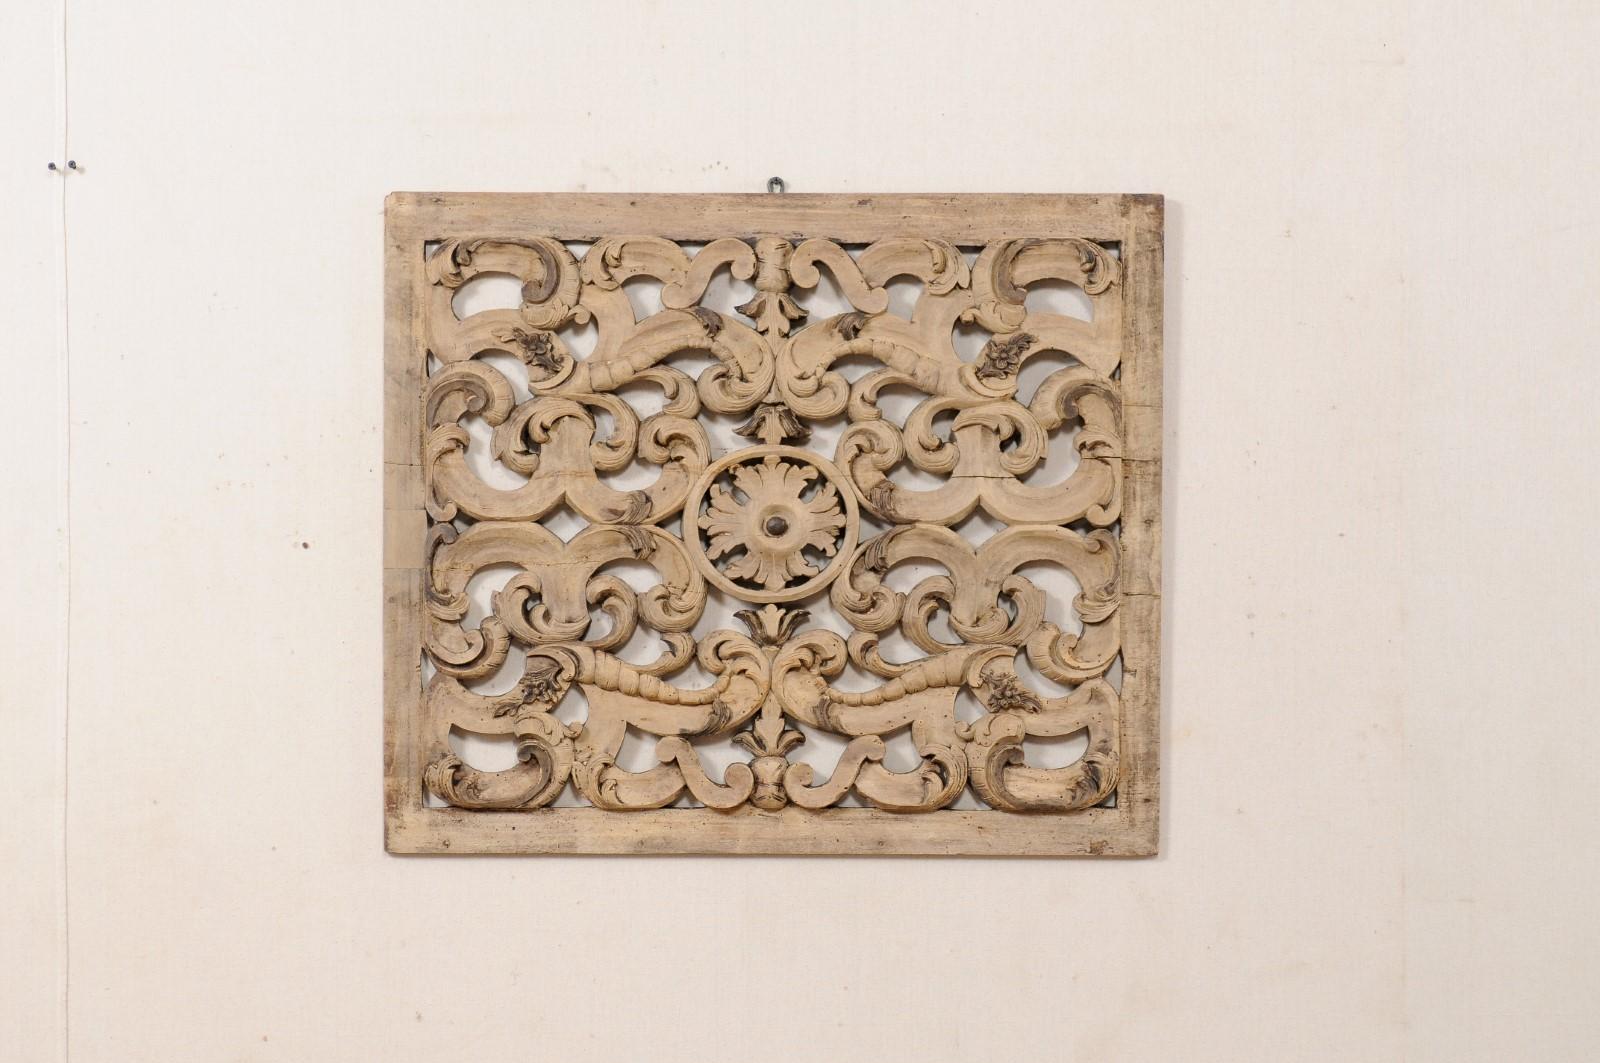 An Italian pierce-carved wooden wall plaque from the early 19th century. This antique architectural wall ornament from Italy has a nearly square shape and has been elaborately hand carved with a beautiful pierced scrolling acanthus leaf motif with